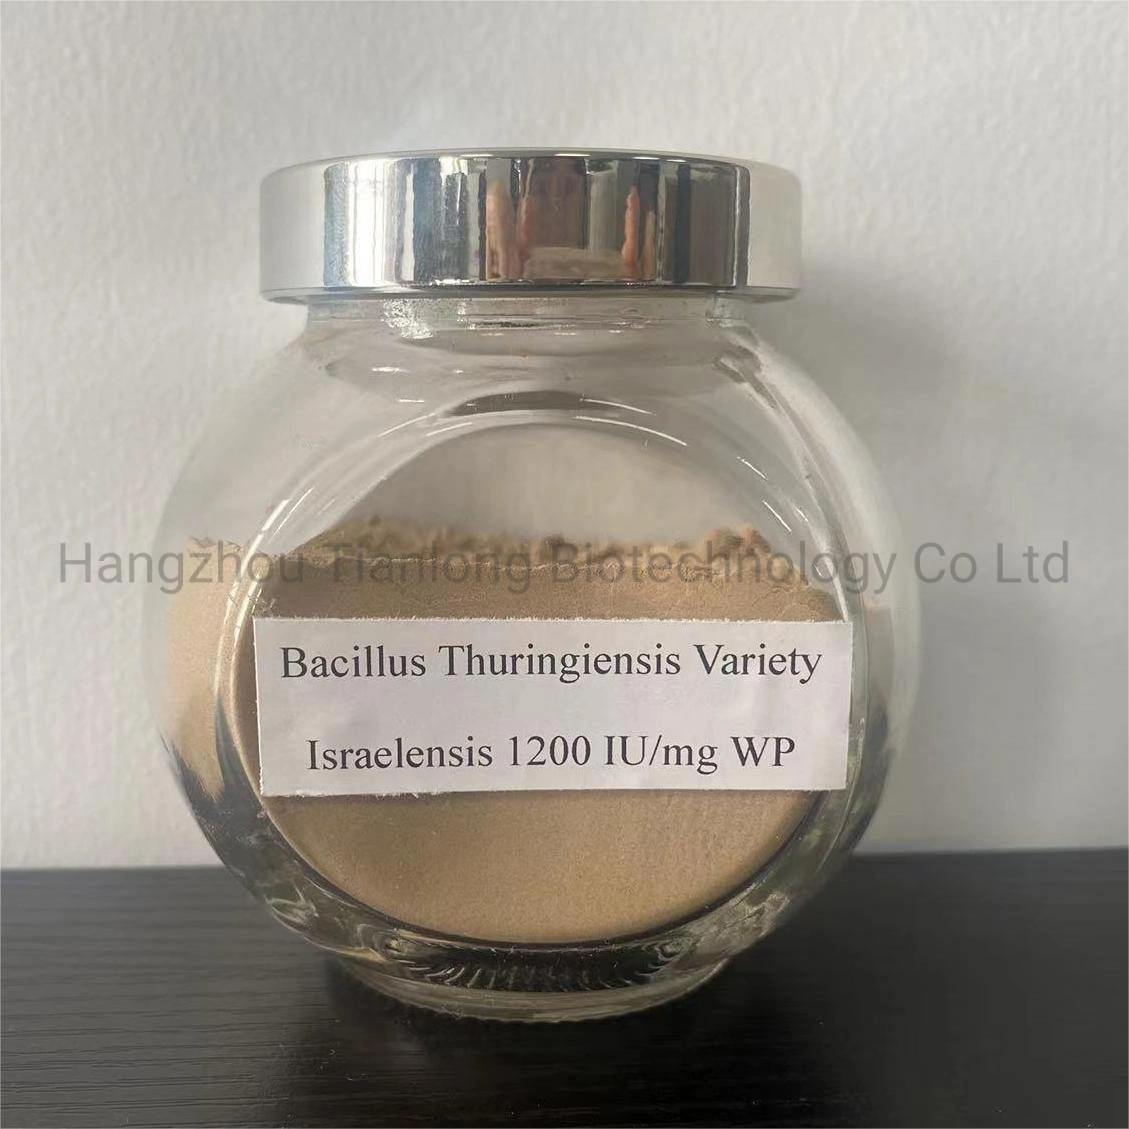 Excellent Quality Insecticide Bacillus Thuringiensis Variety Israelensis (Bti) 1200IU/mg WP